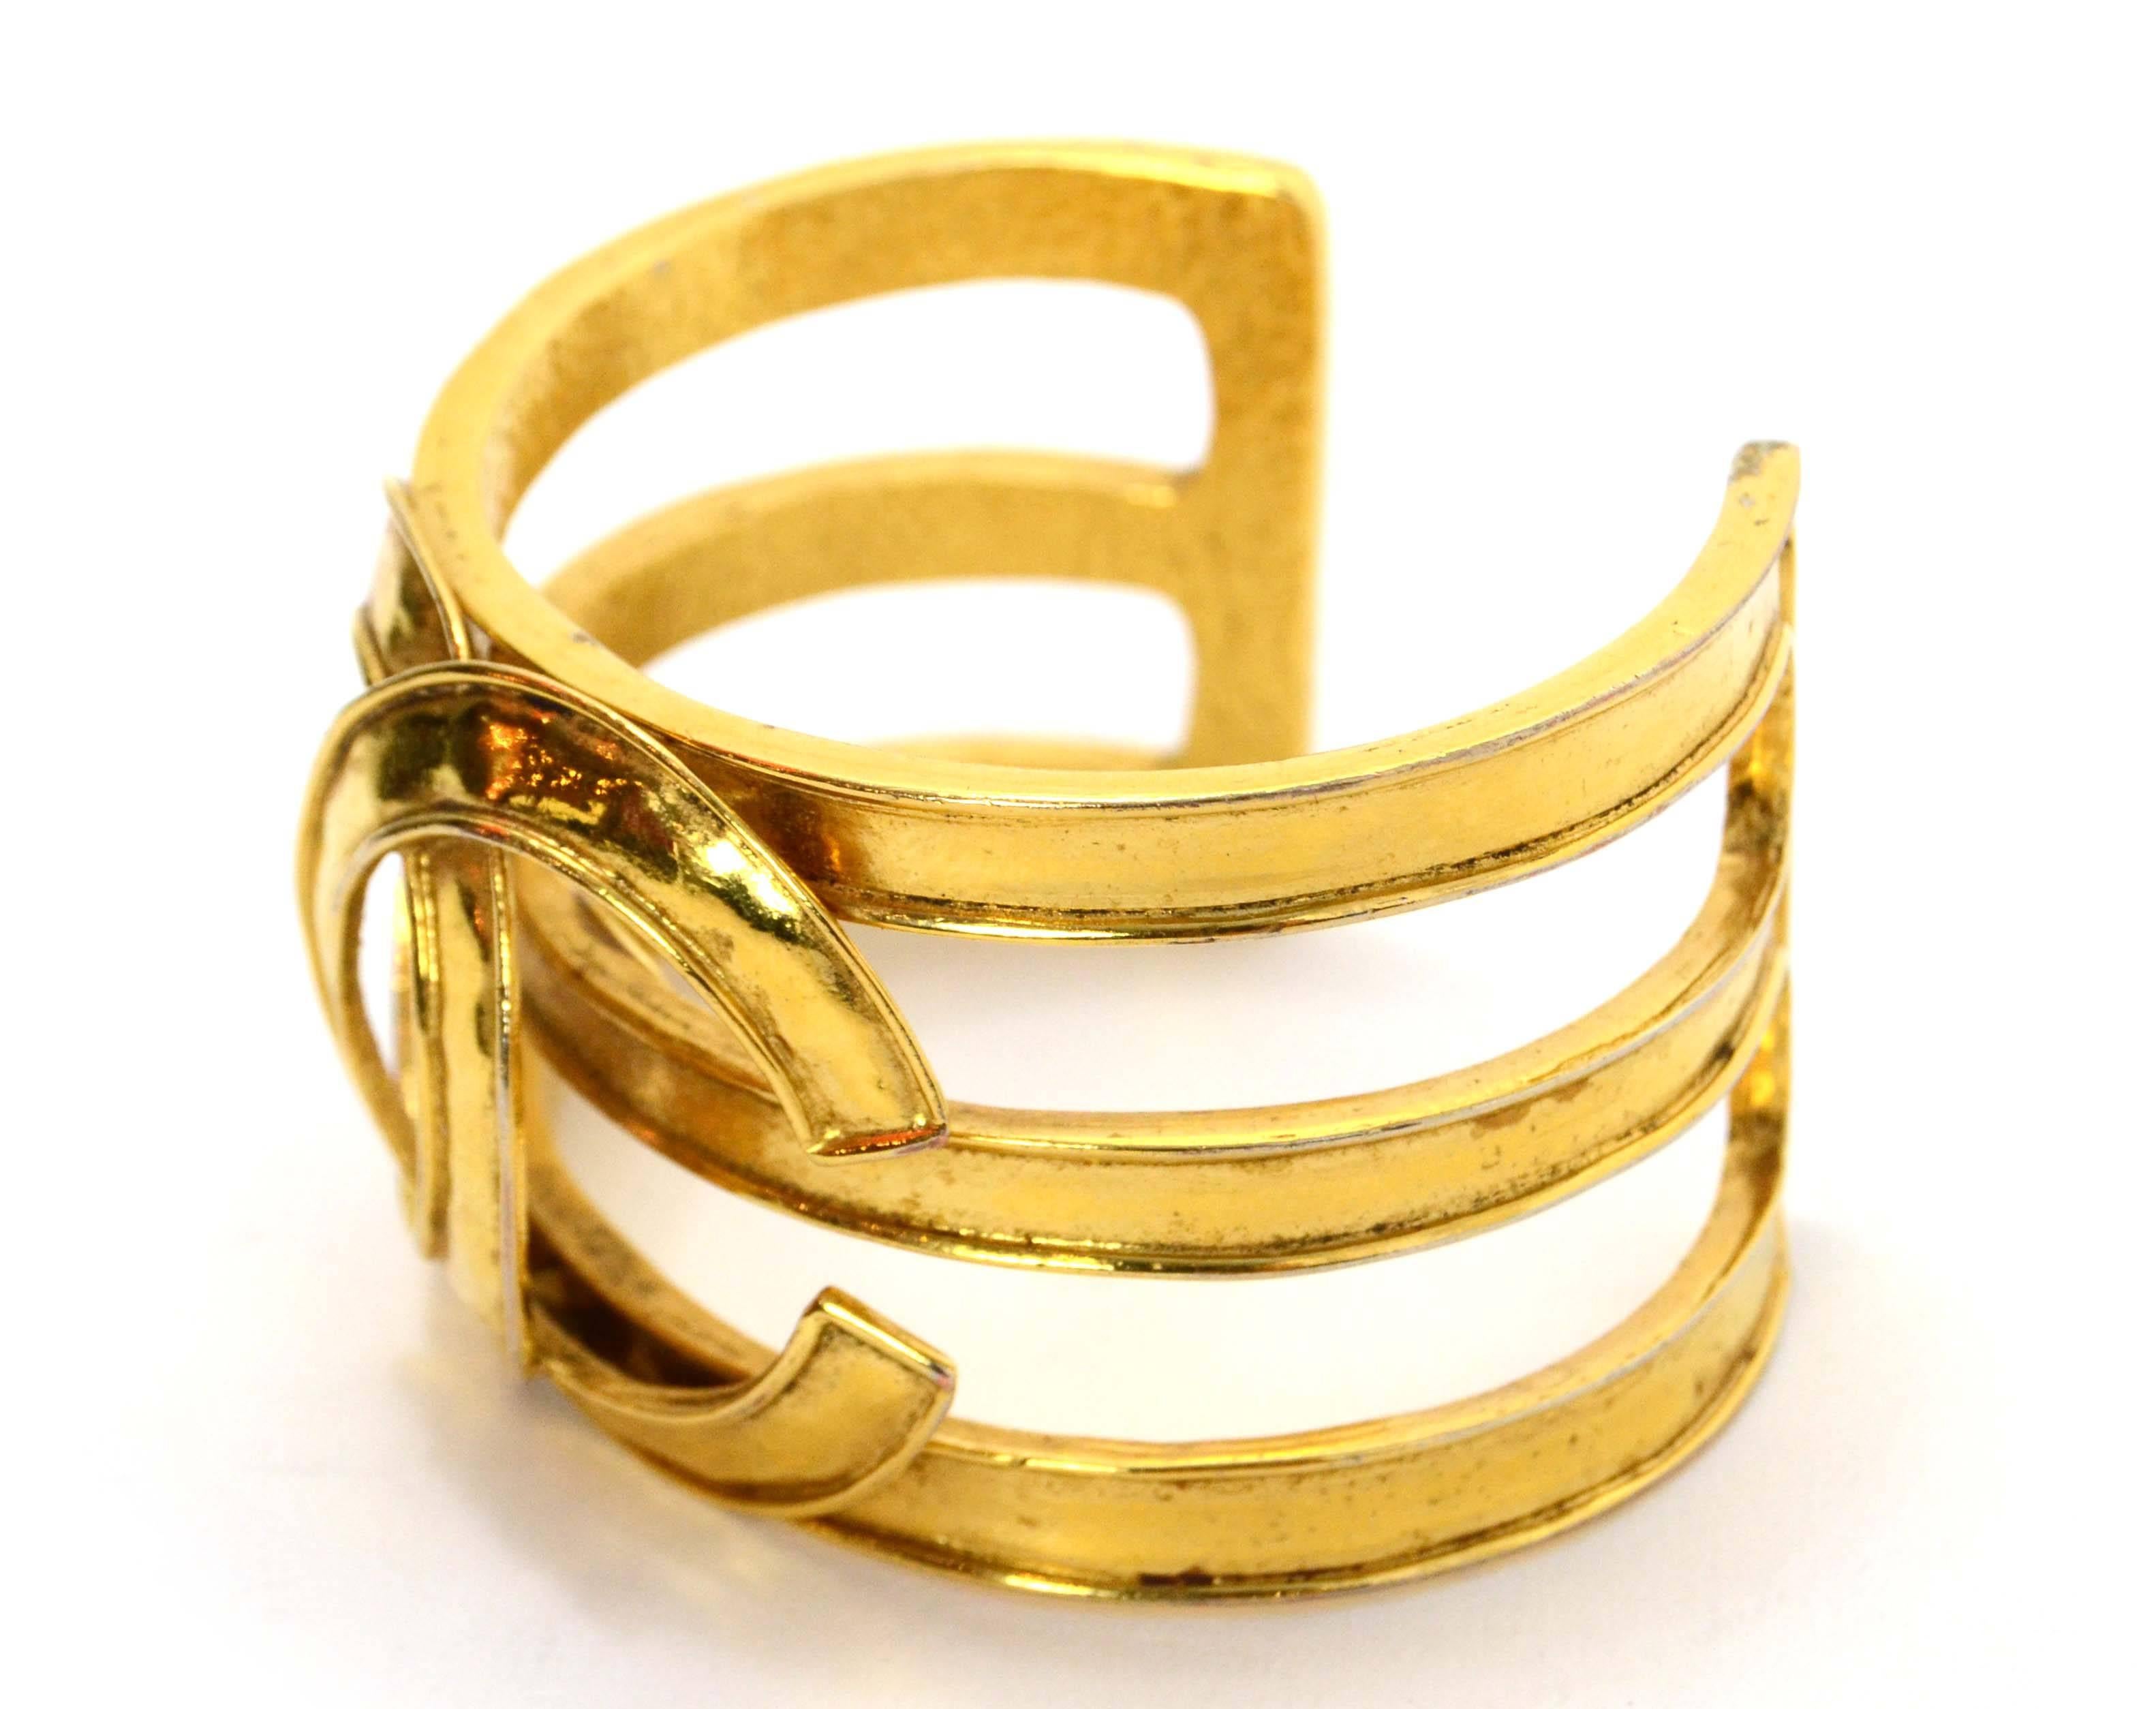 Chanel Vintage '94 Gold Cuff Bracelet 
Features large CC in center 
Made In: France
Year of Production: 1994
Color: Goldtone
Materials: Metal
Closure: None
Stamp: 94 CC P
Overall Condition: Excellent vintage, pre-owned condition with the